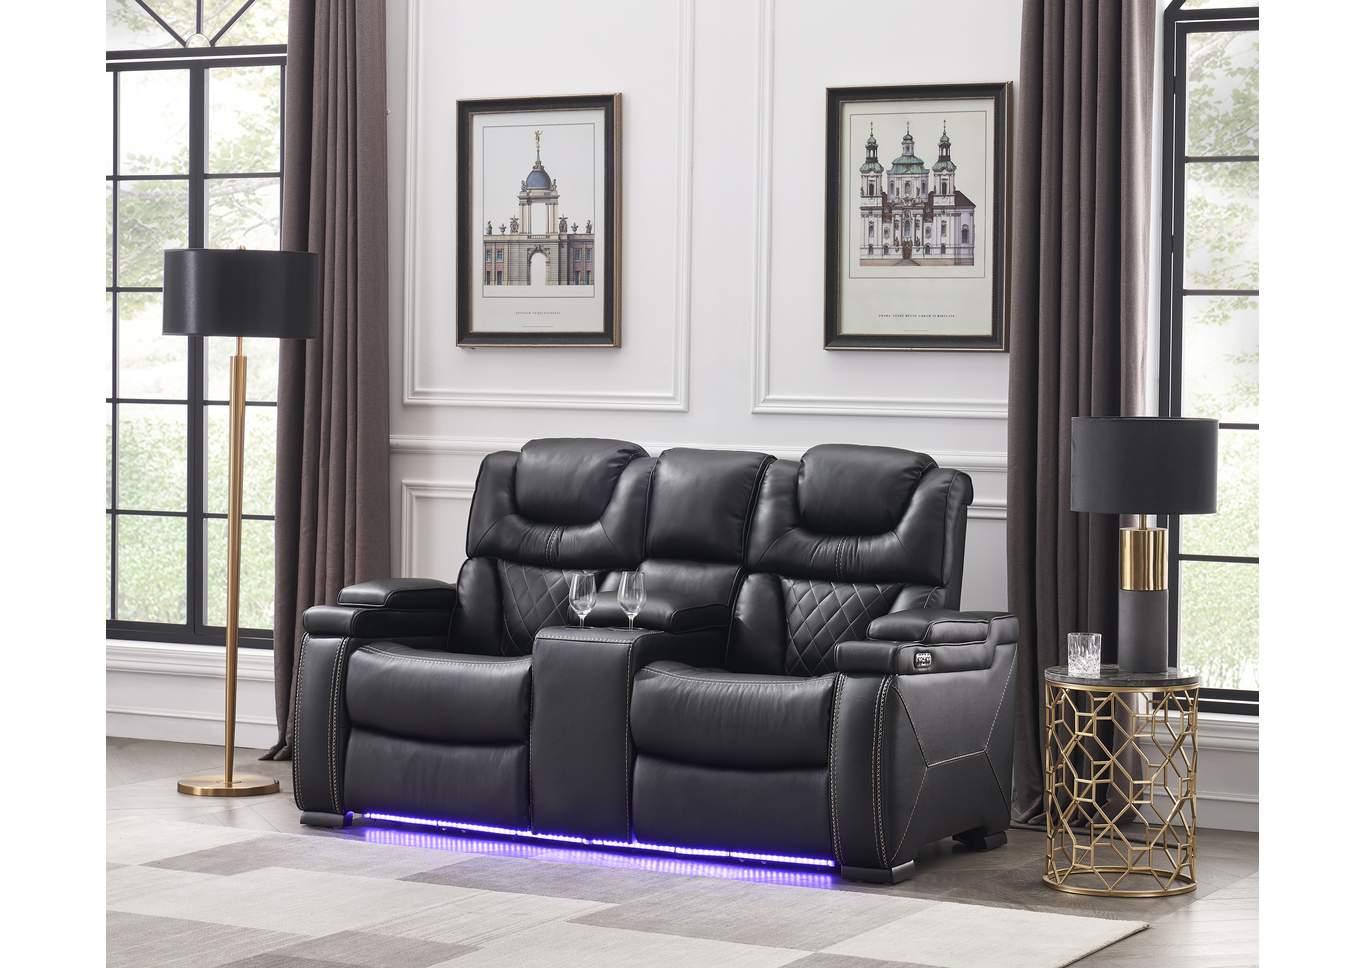 

                    
Galaxy Home Furniture LEXUS Recliner Sofa Set Black Eco Leather Purchase 
